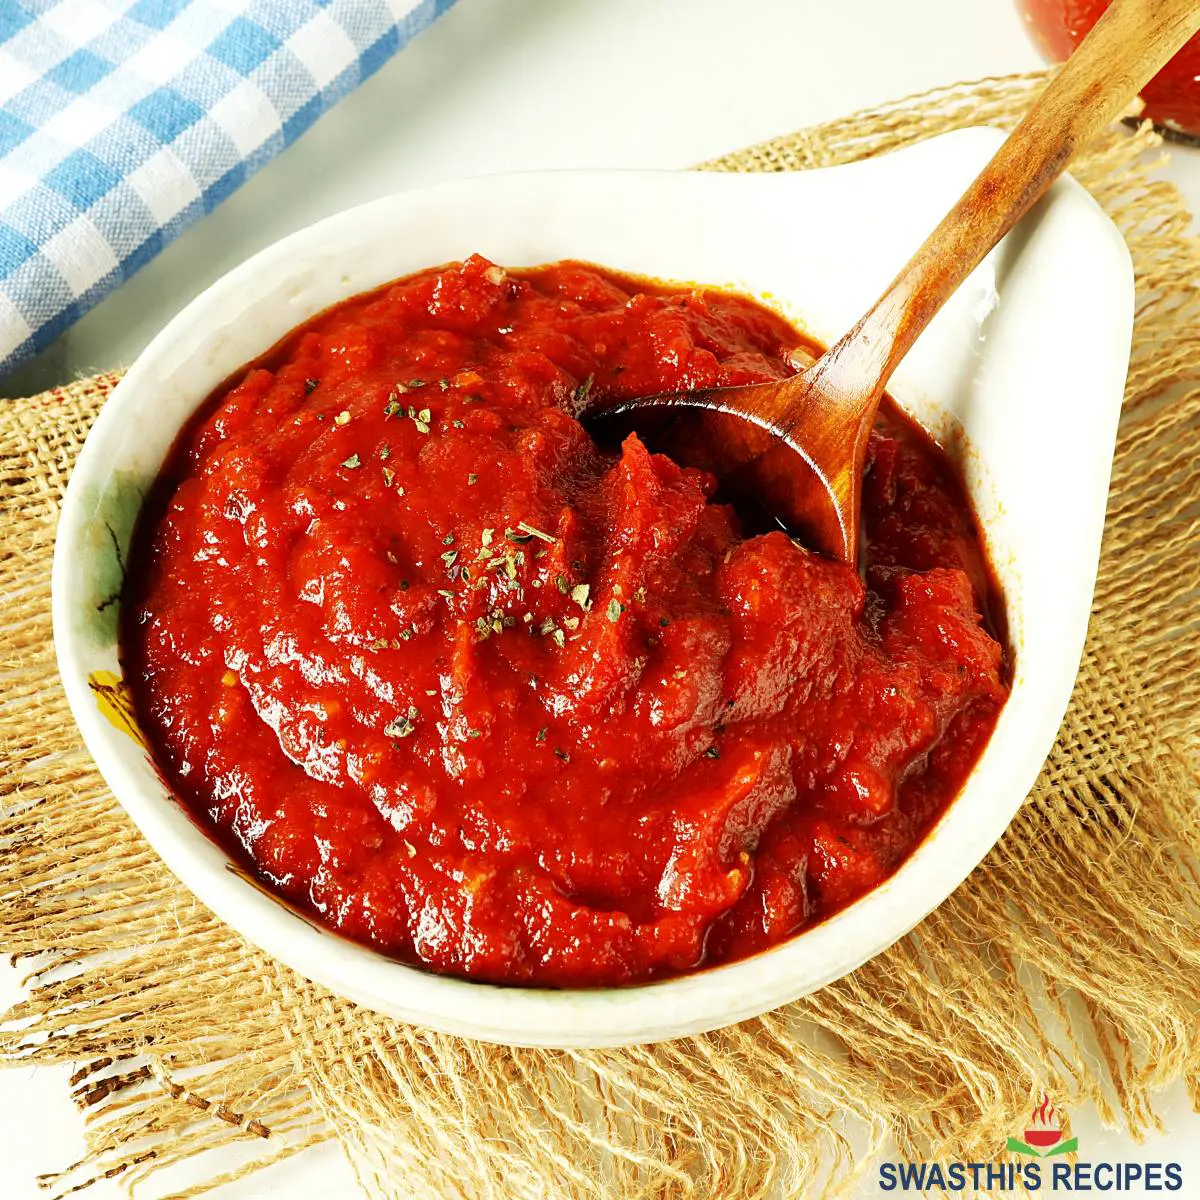 pizza sauce recipe from fresh tomatoes